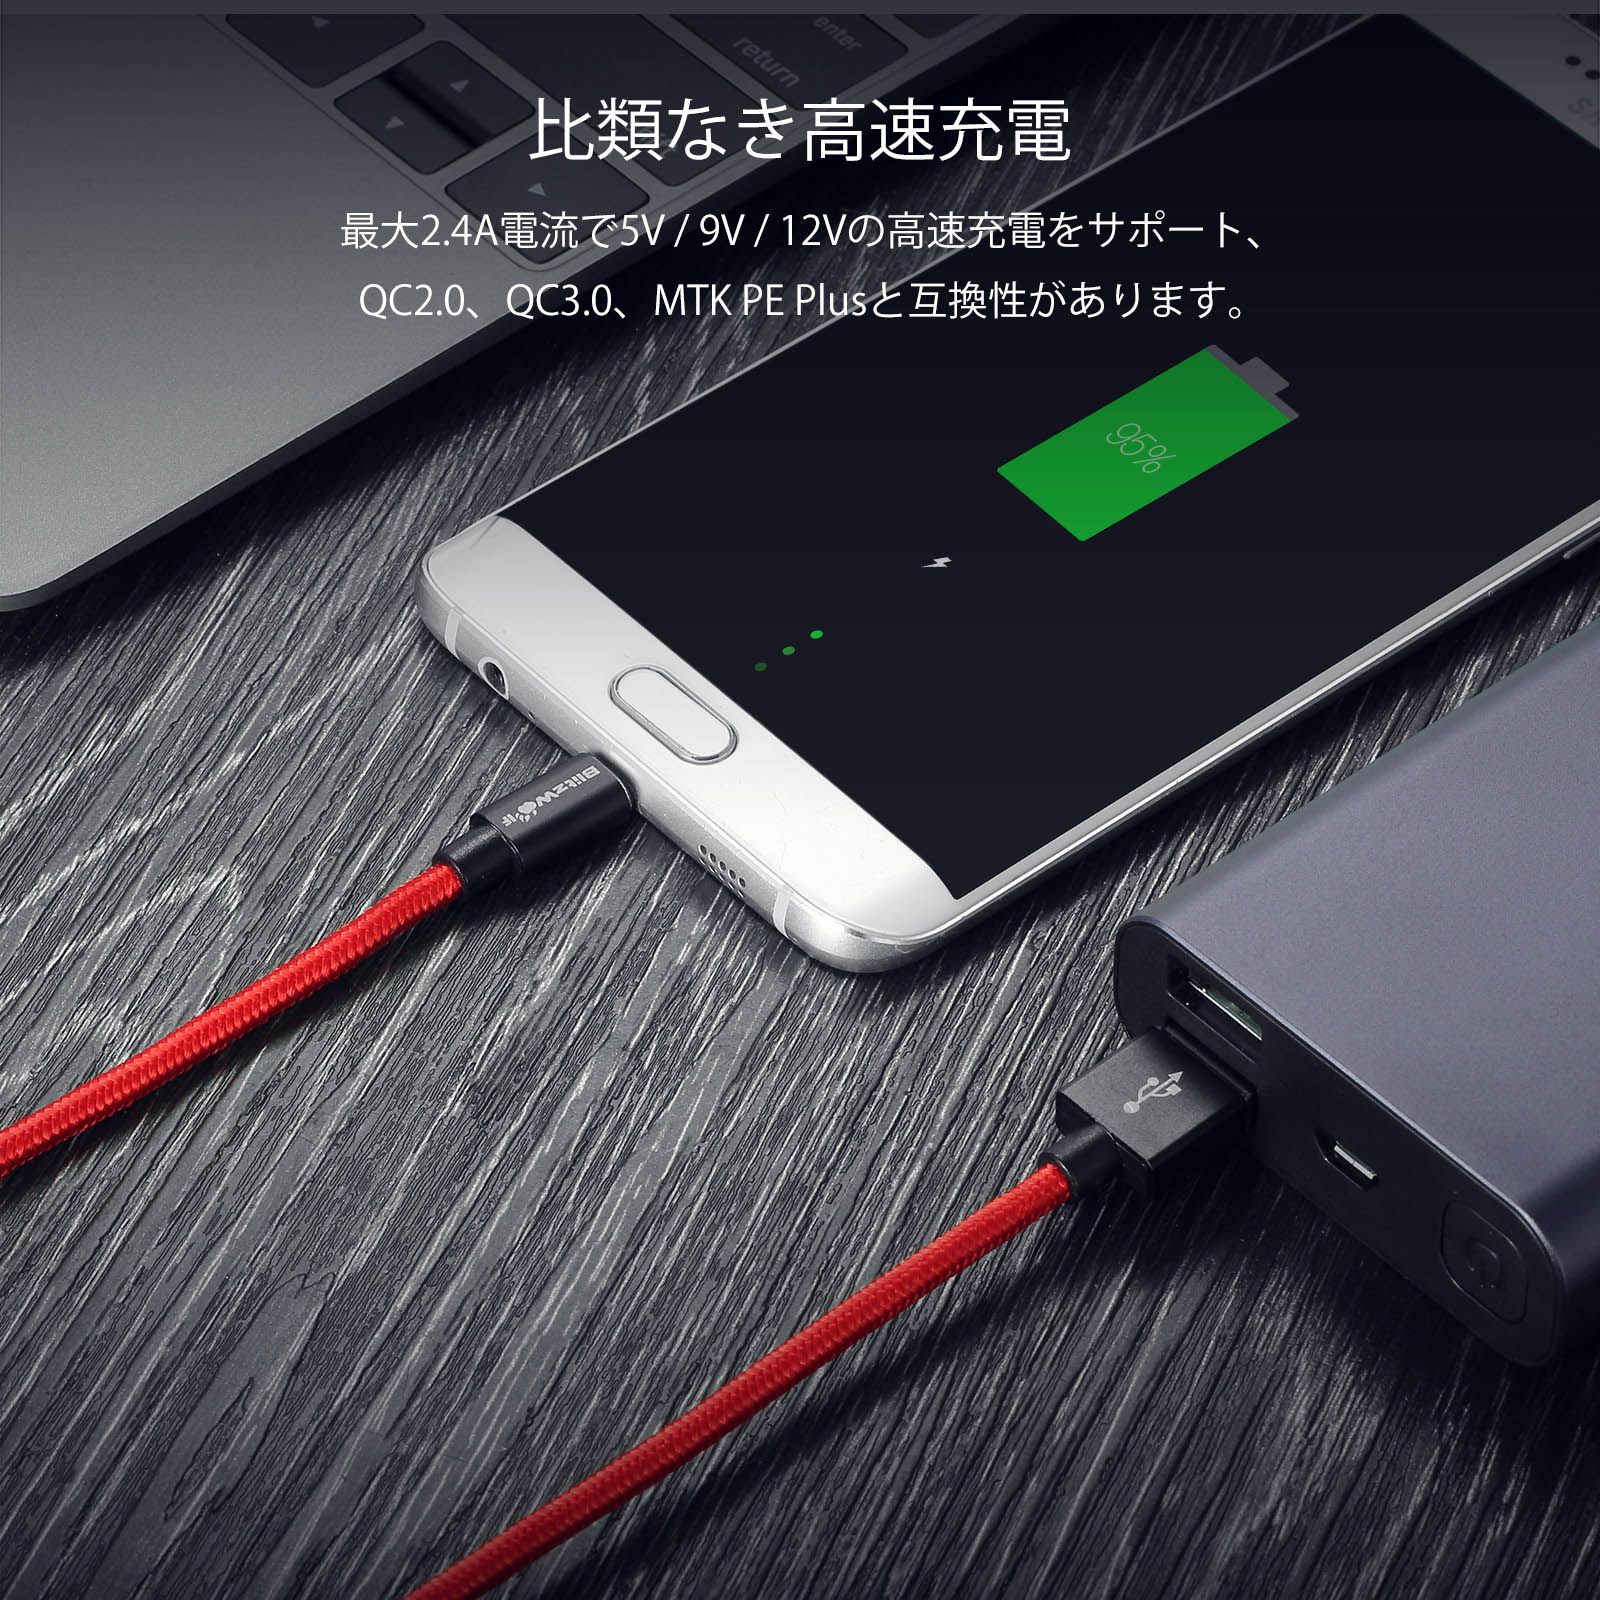 BlitzWolfreg-BW-MC1-Data-Cable-Durable-Micro-USB-Fast-Charging-For-Xiaomi-Nexus-LG-Android-Smartphon-1117566